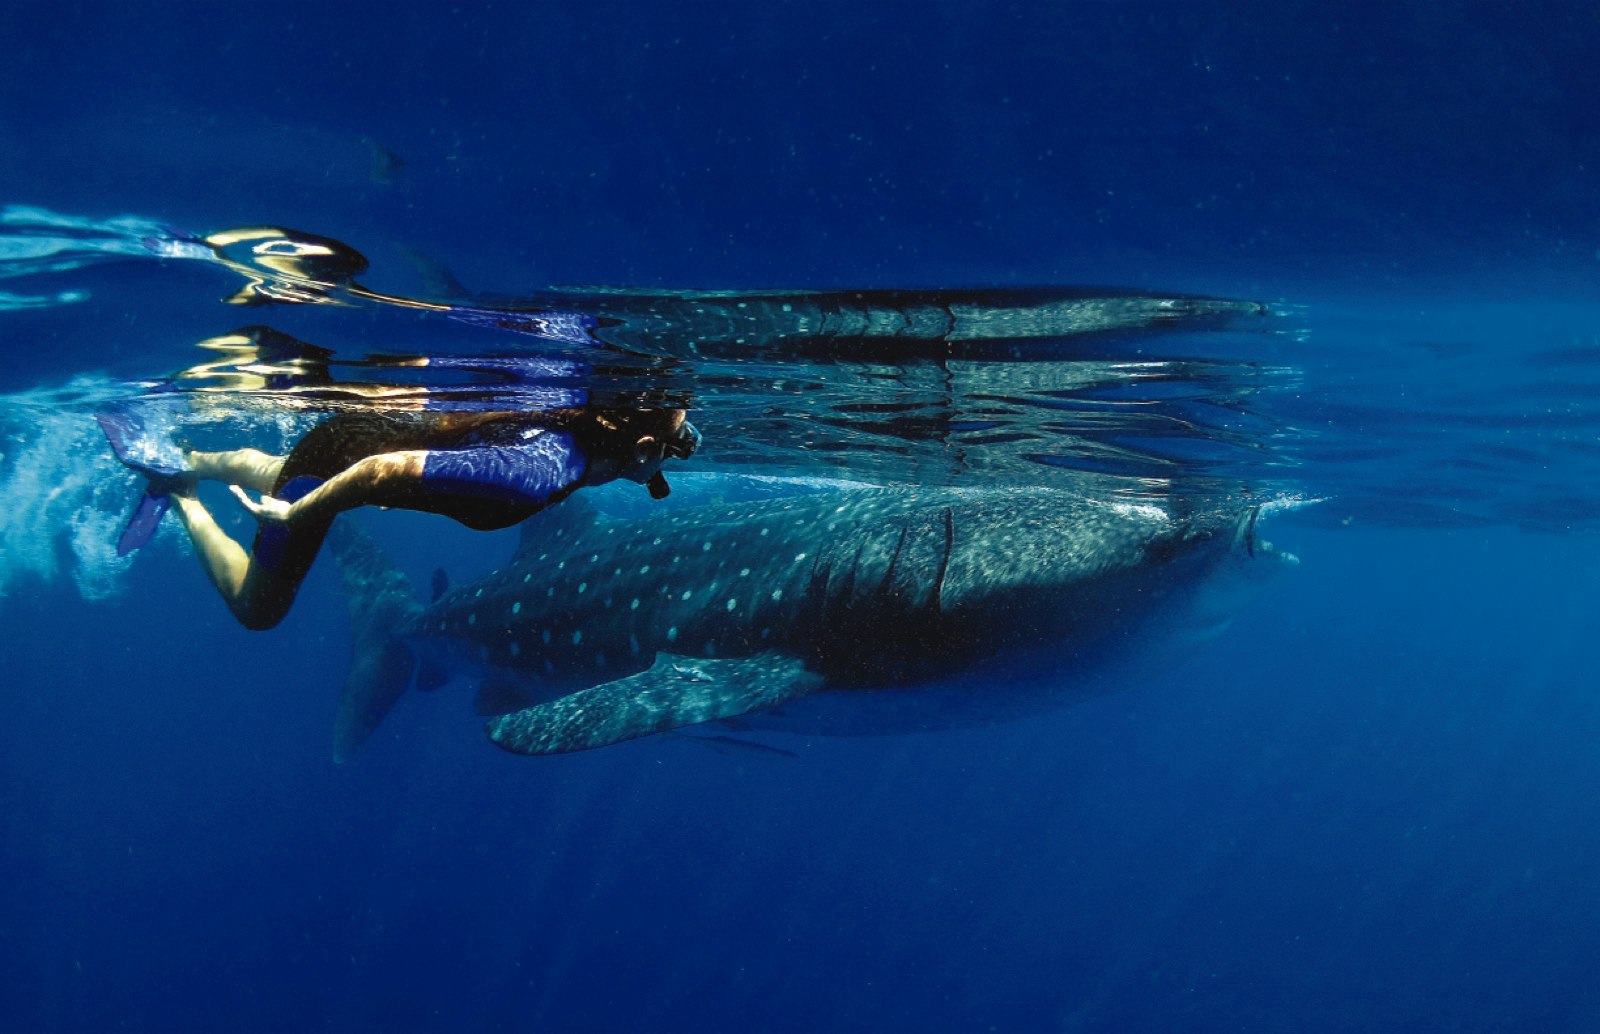 A diver swims next to a whale shark in clear blue water